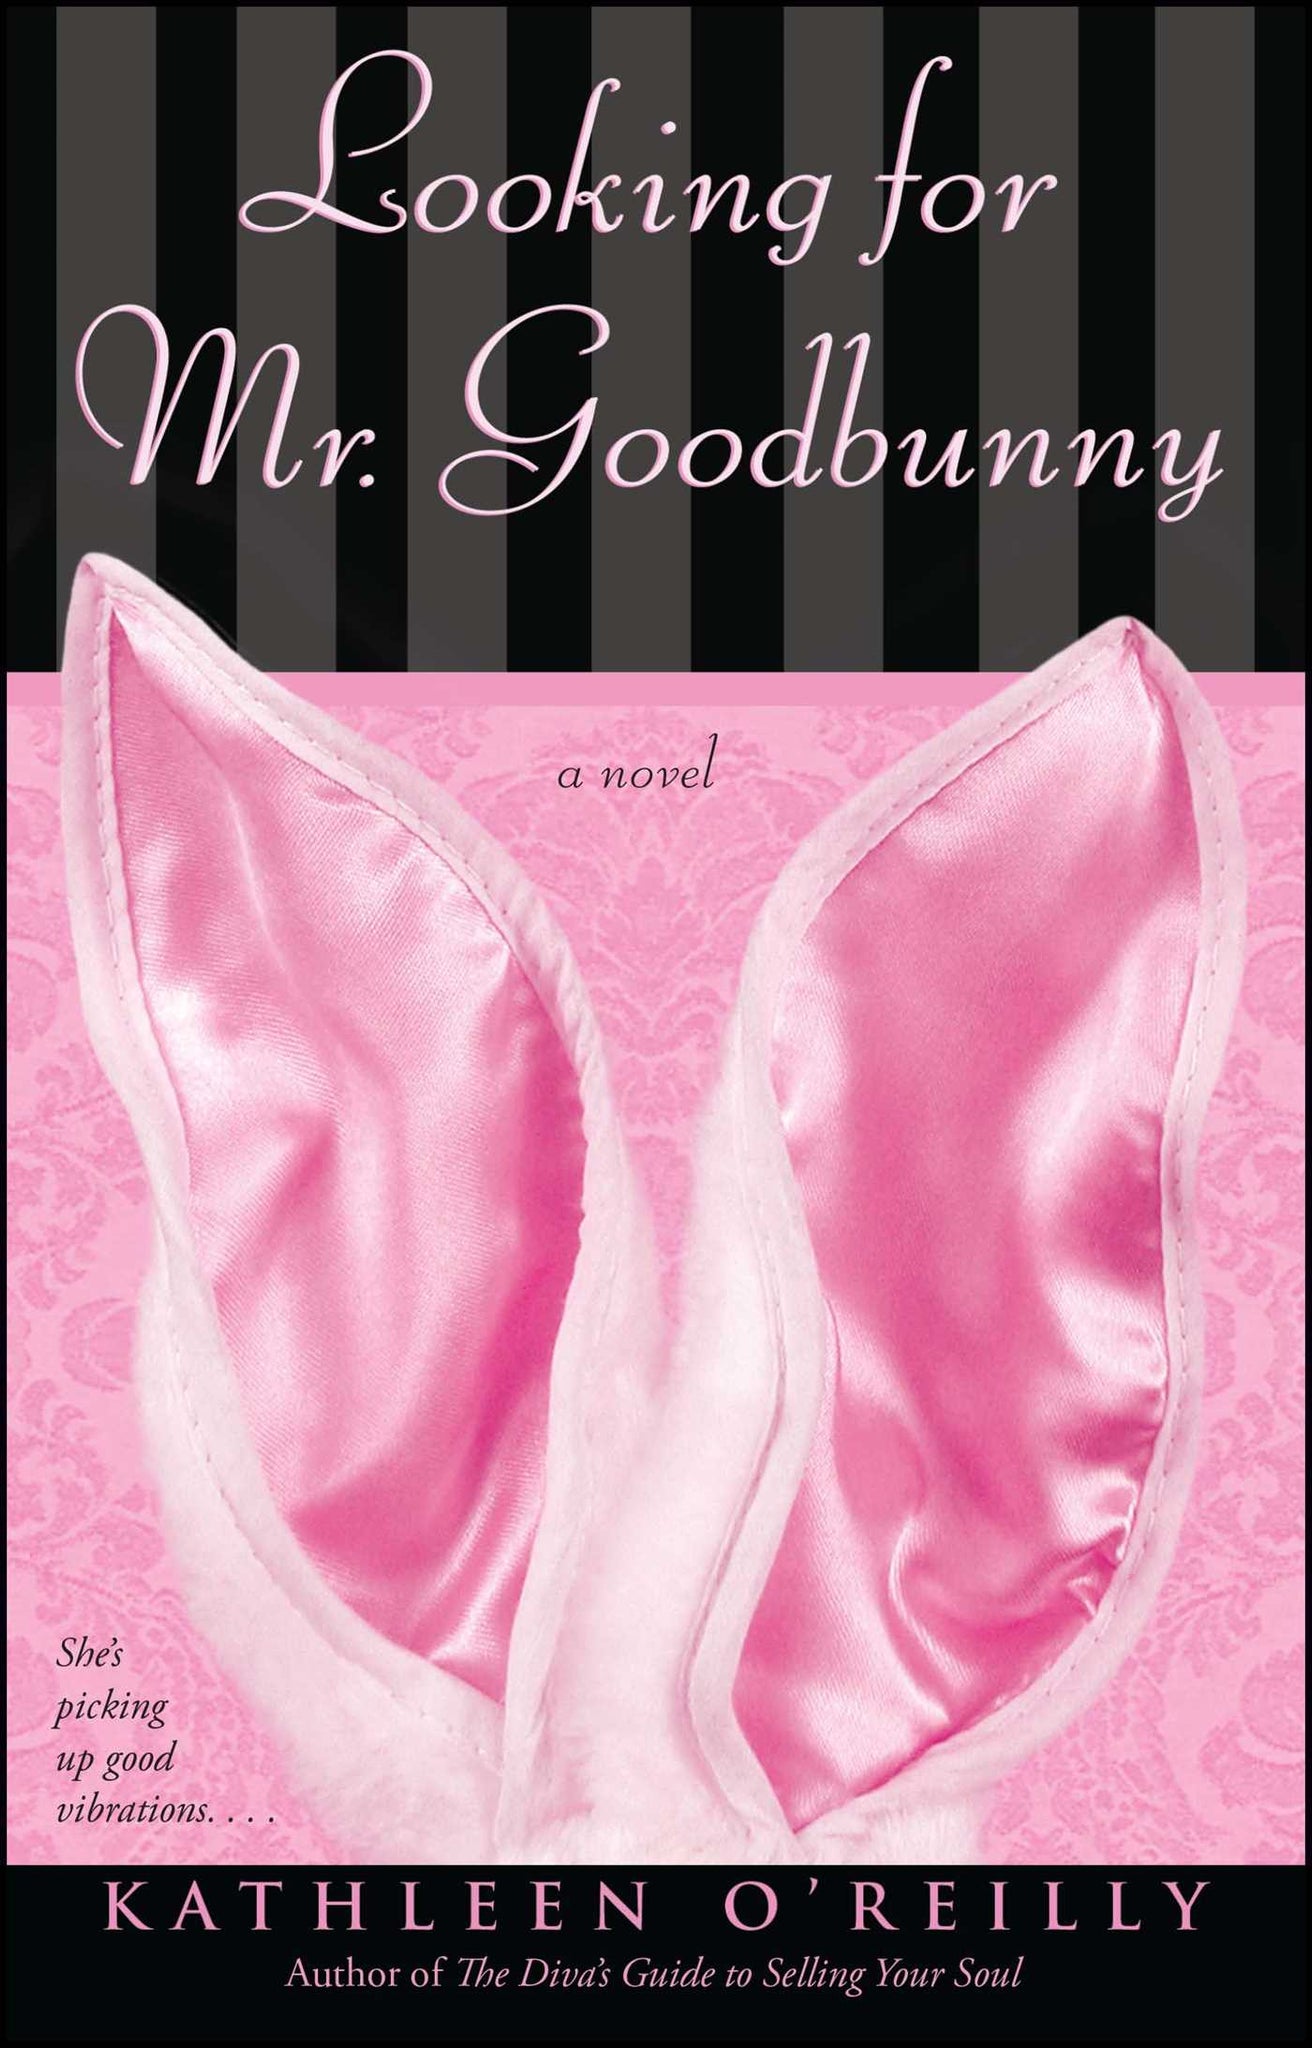 Looking for Mr. Goodbunny